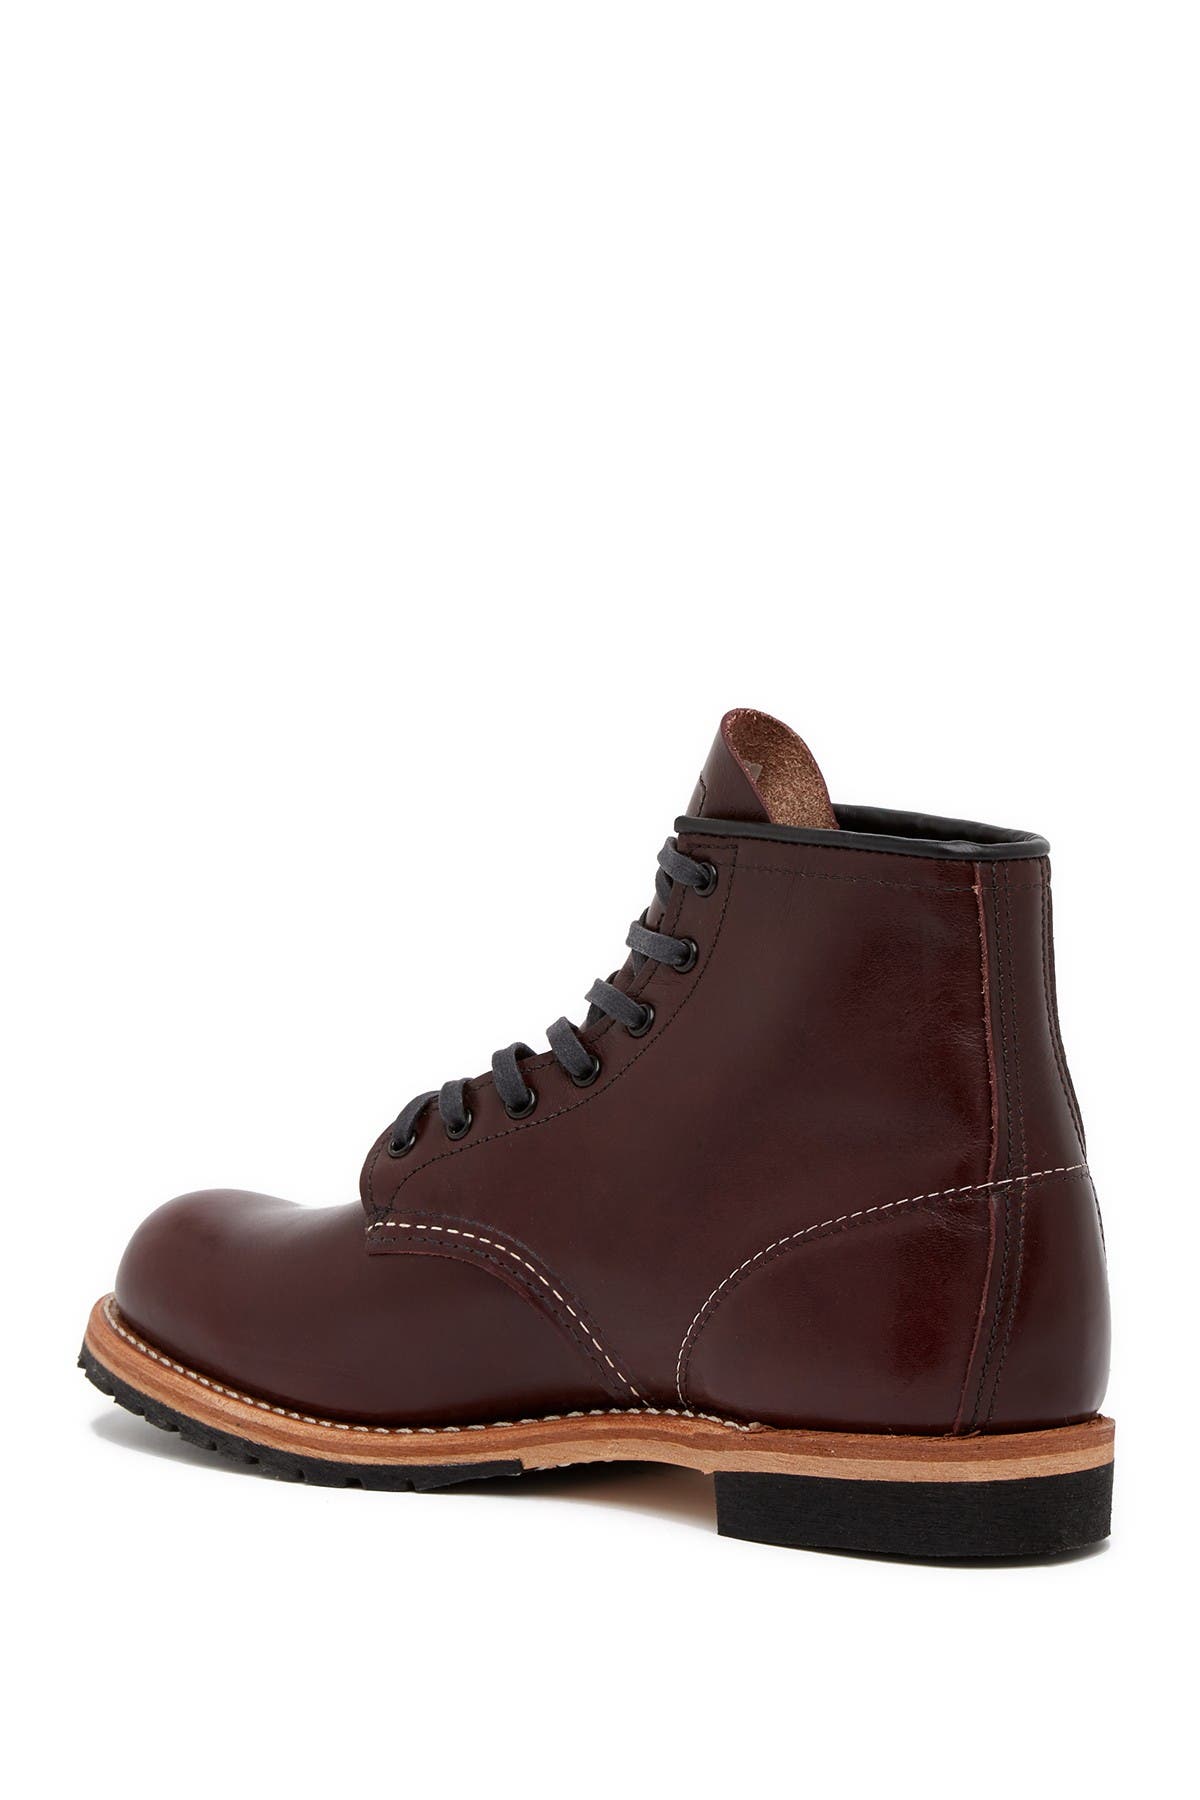 red wing beckman factory seconds